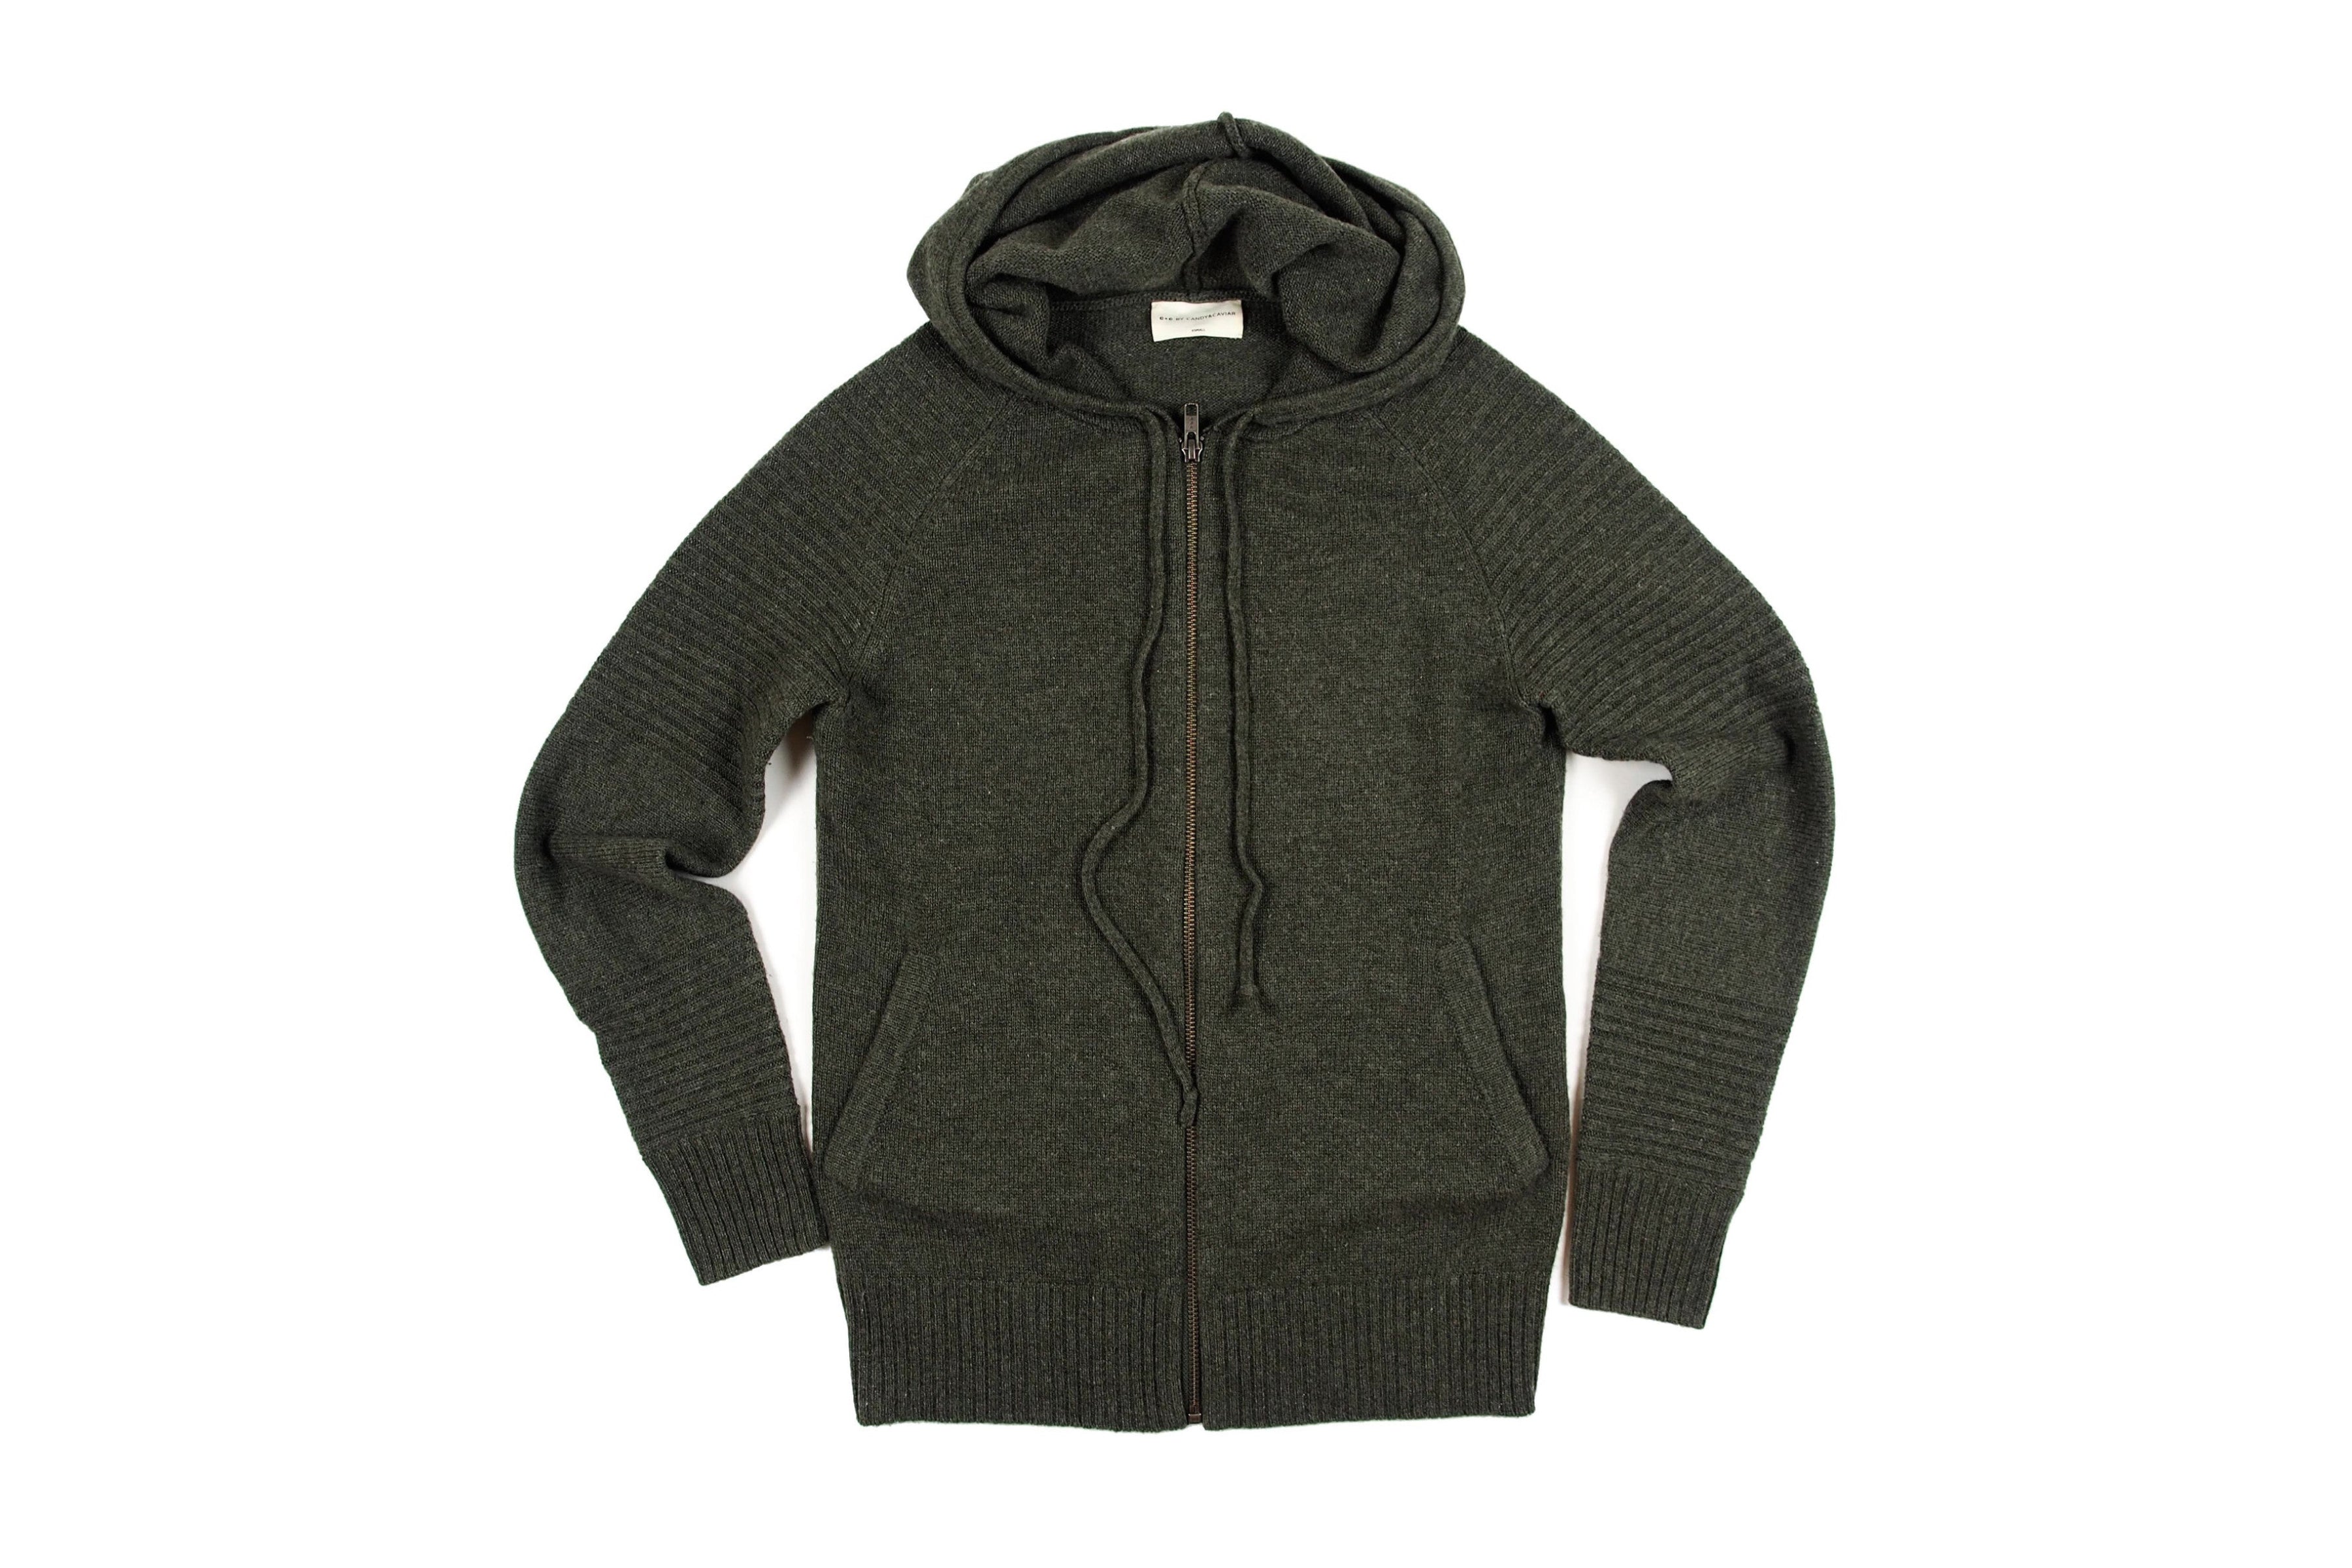 GENTLY USED Men's Cashmere Zip Hoodie (Army Green)